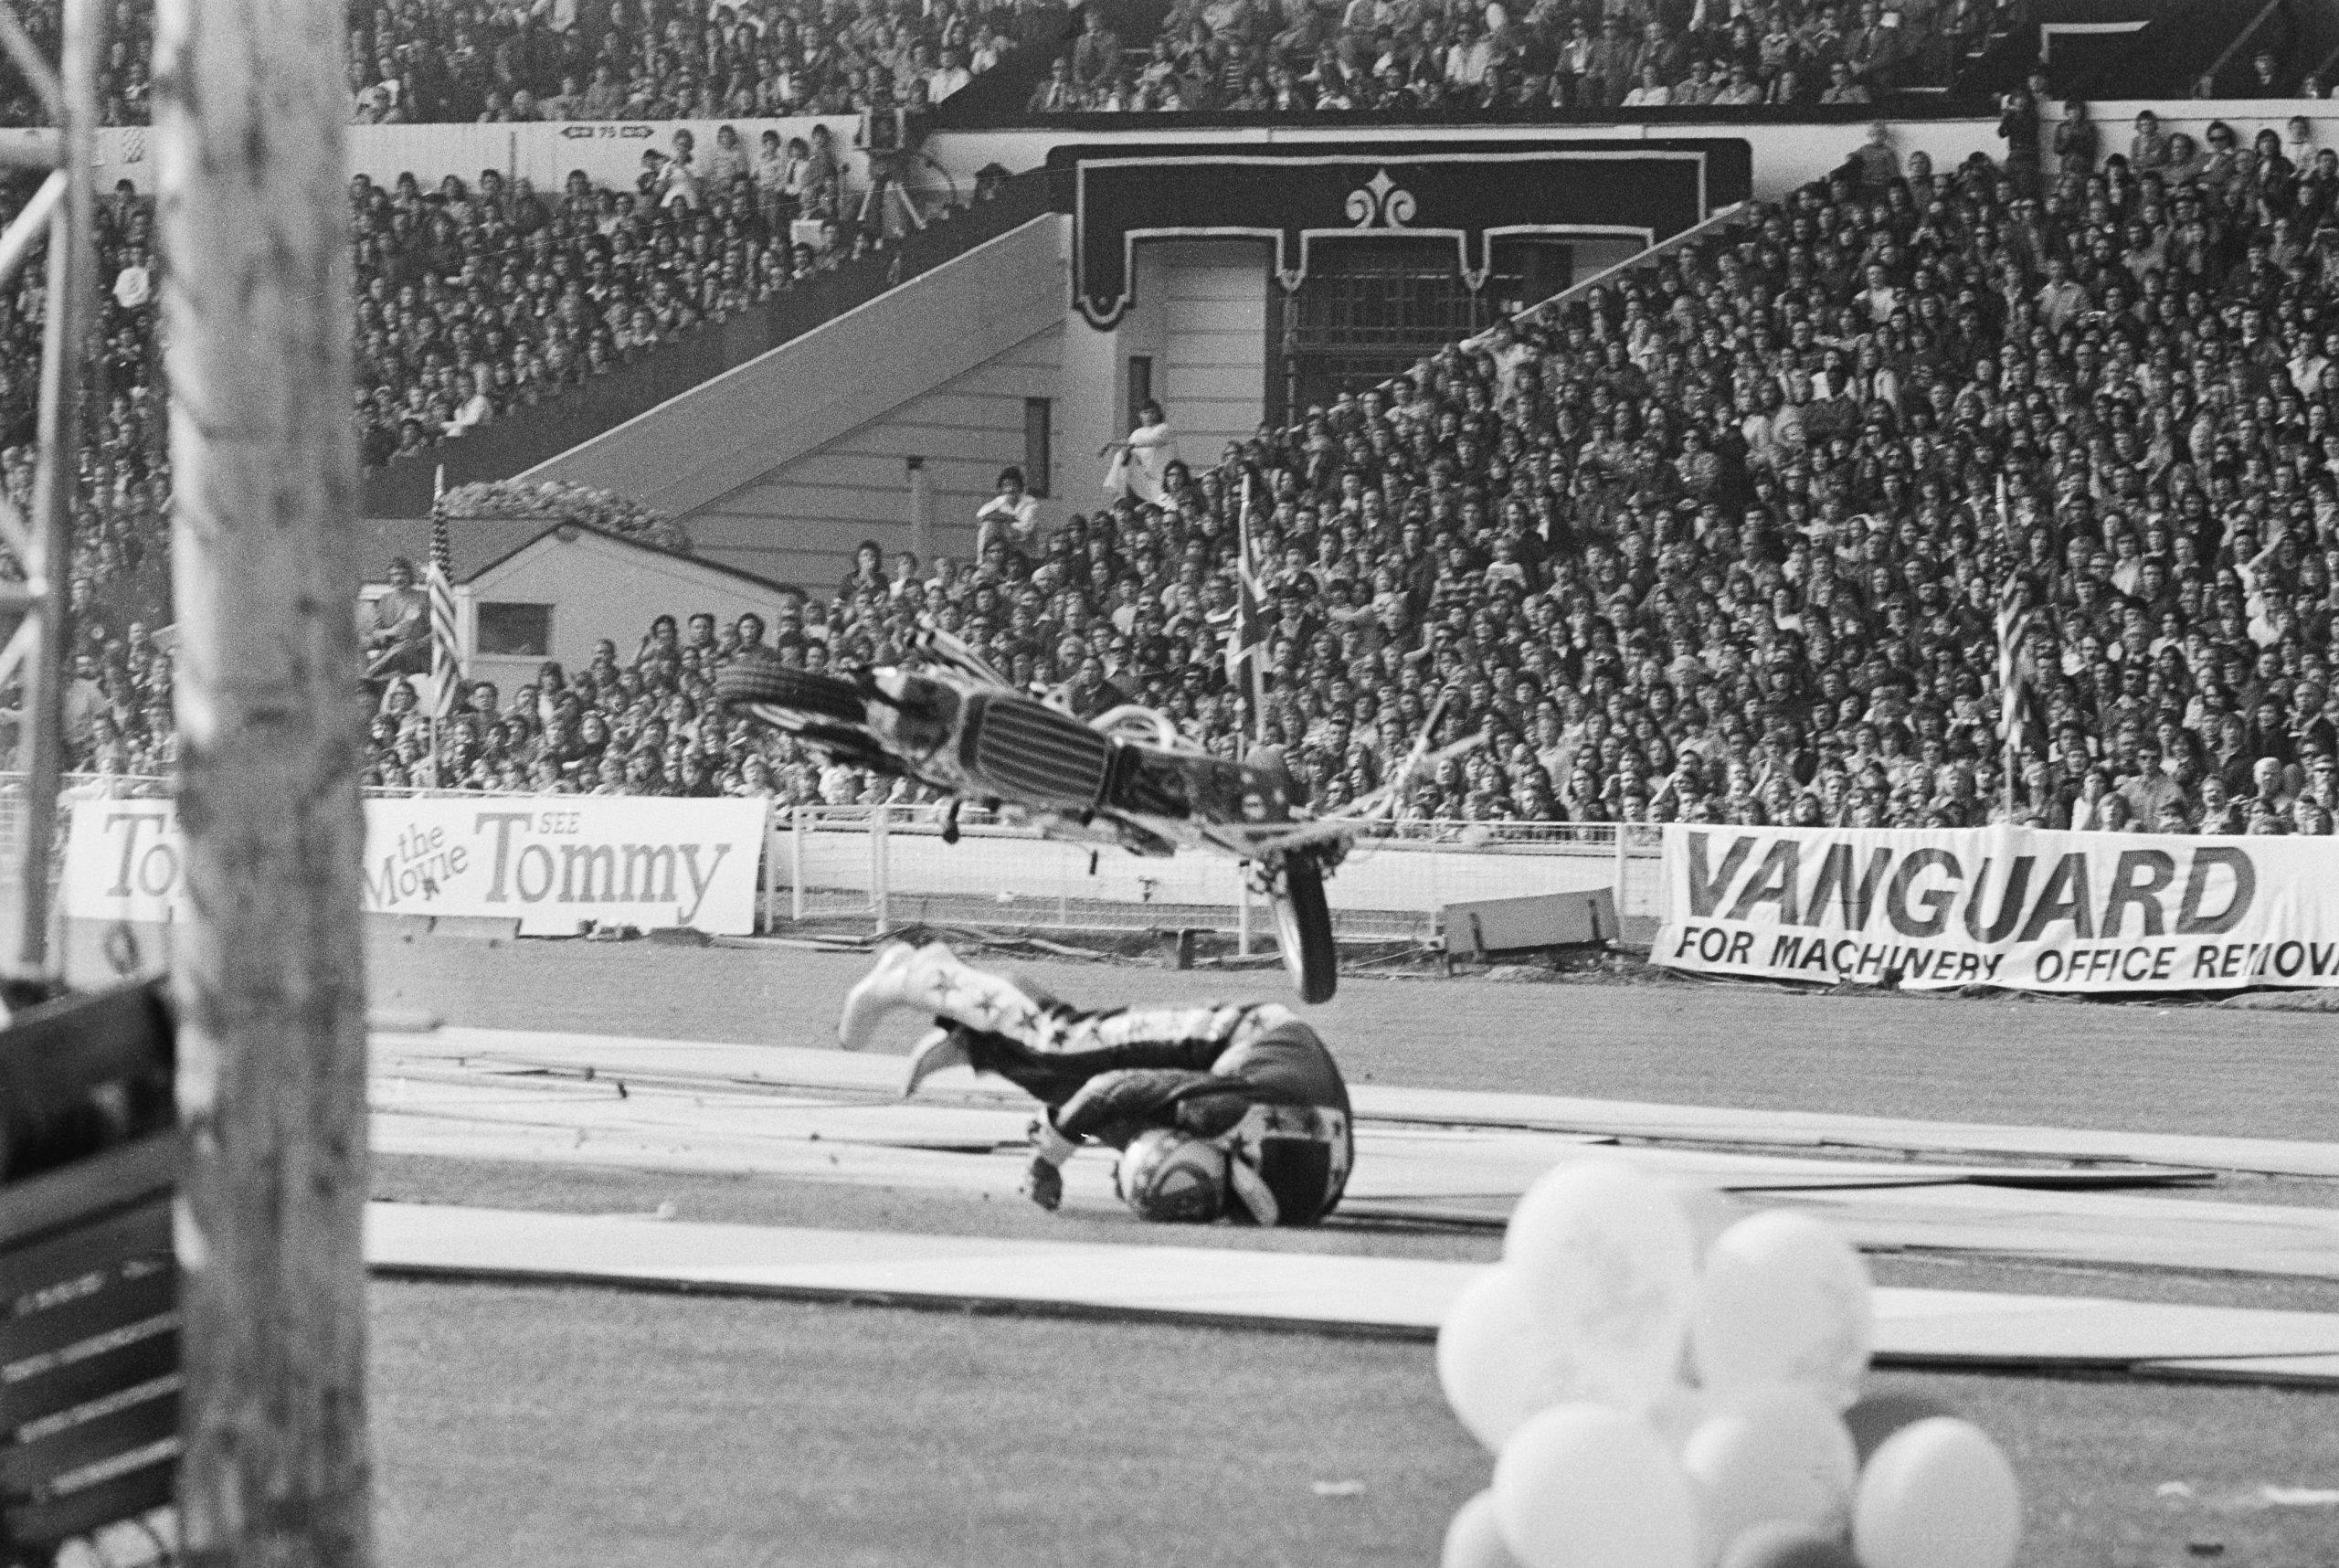 Evel Knievel Landing off his Motorcycle